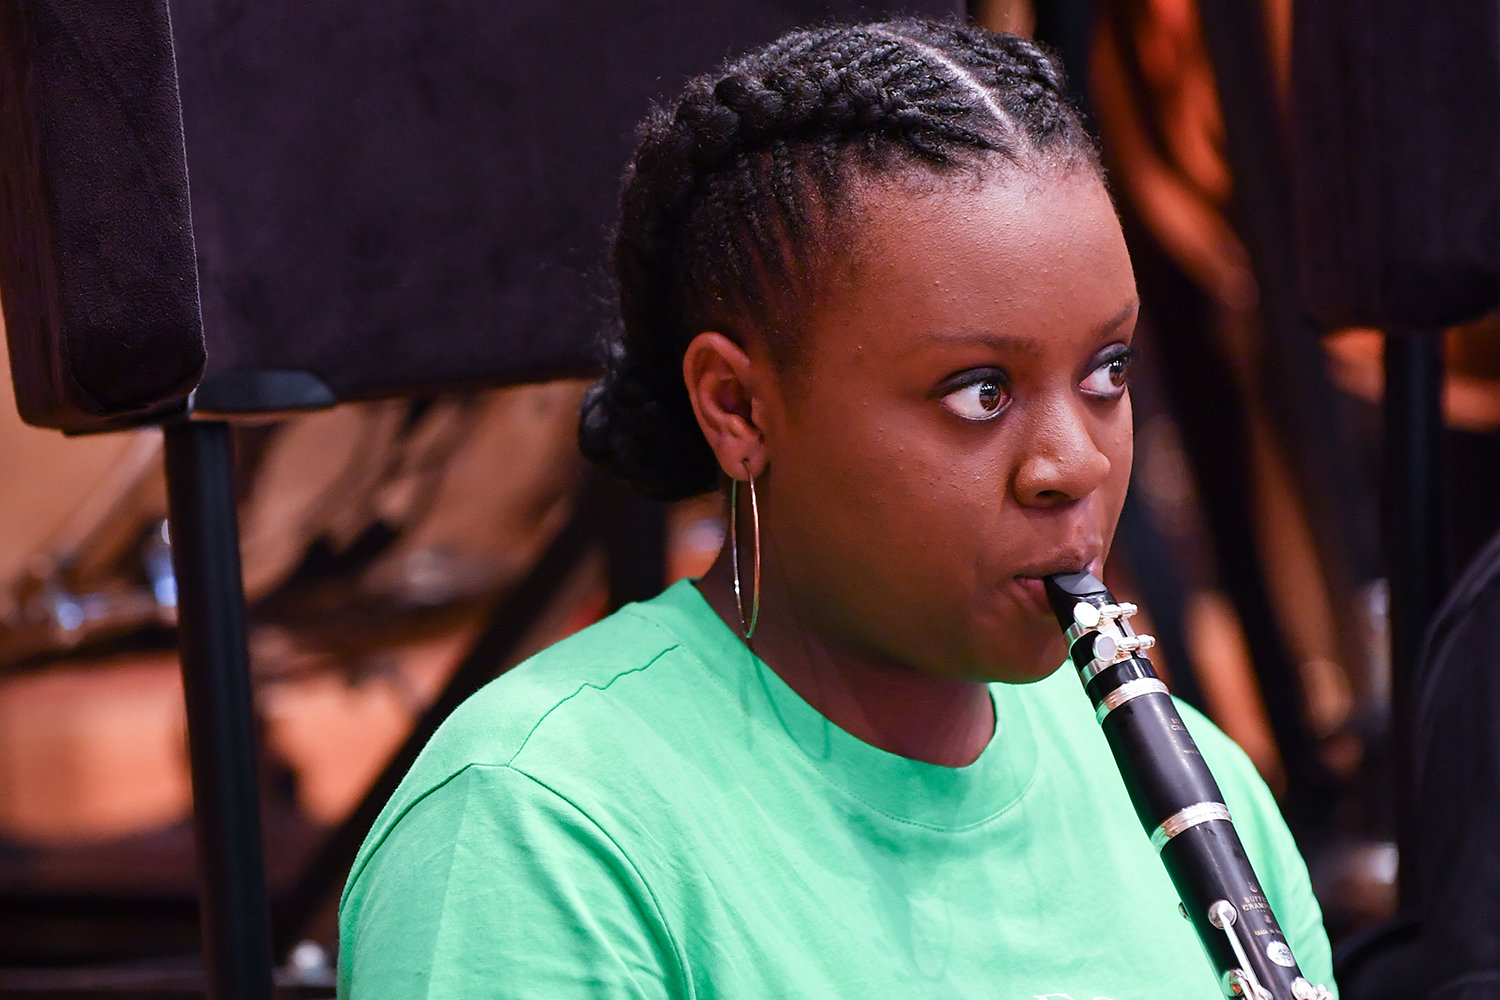 A clarinet player wearing a light green t-shirt performs on her instrument